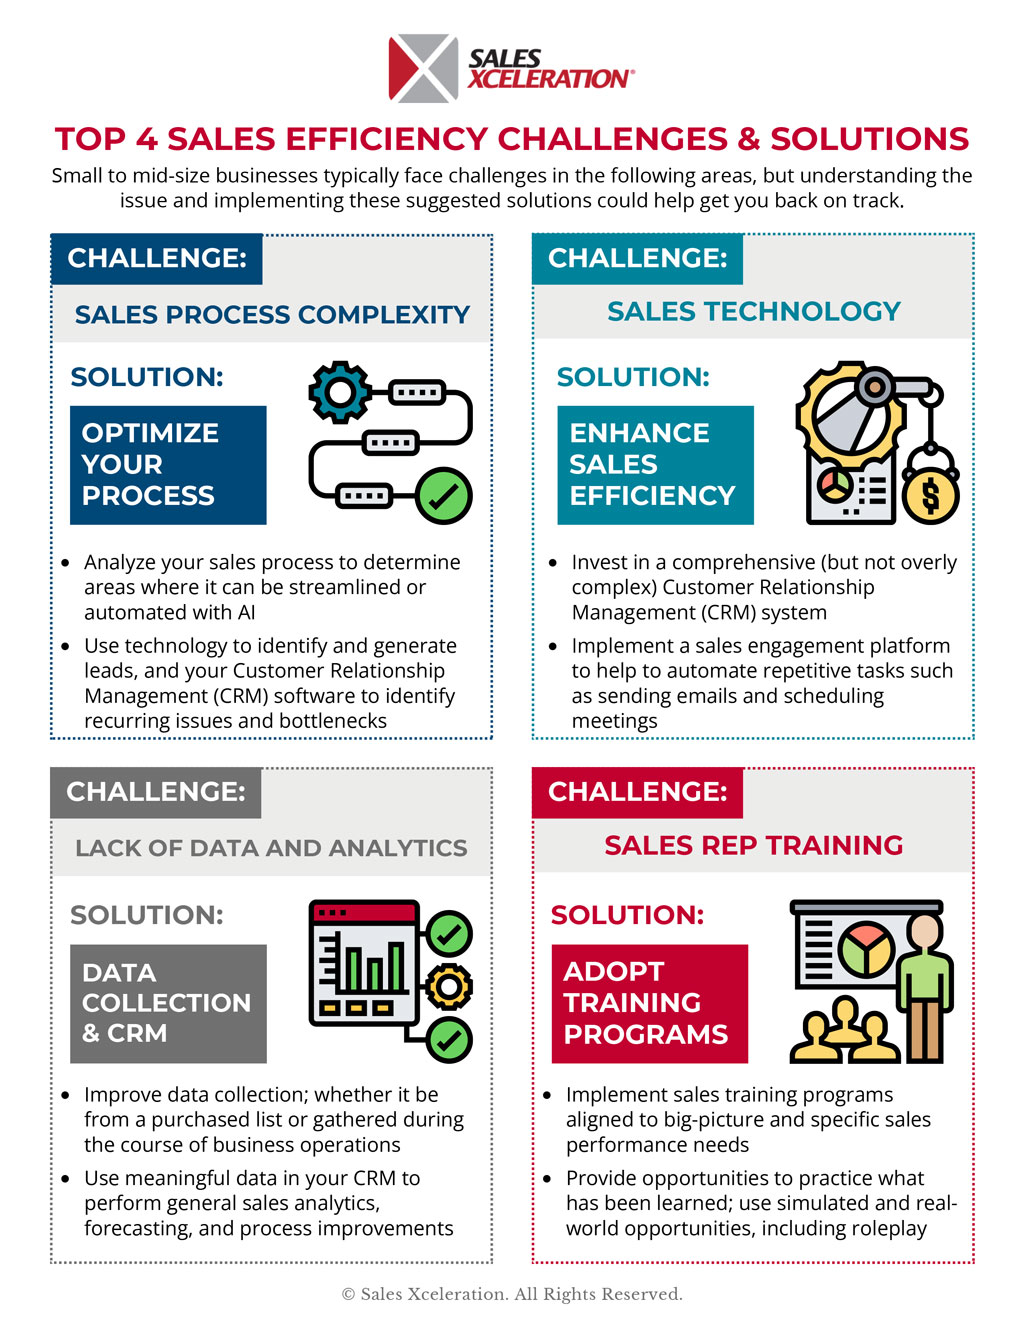 Infographic with four sales efficiency challenges: sales process complexity, sales technology, lack of data and analytics, and sales rep training, and solutions.